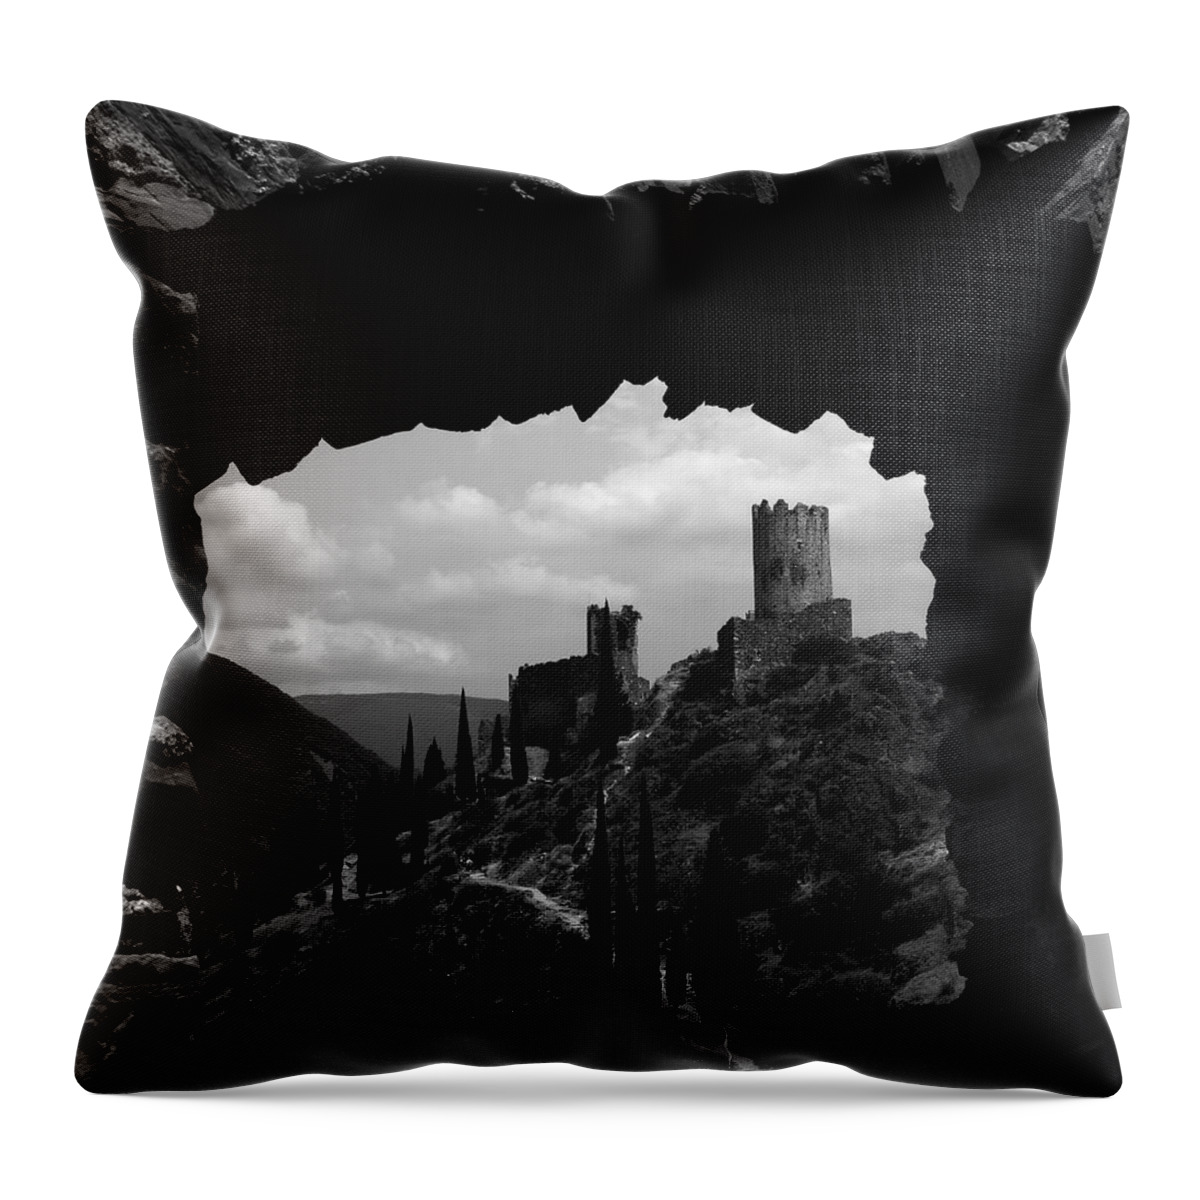 Castle Throw Pillow featuring the photograph The castles by Emme Pons